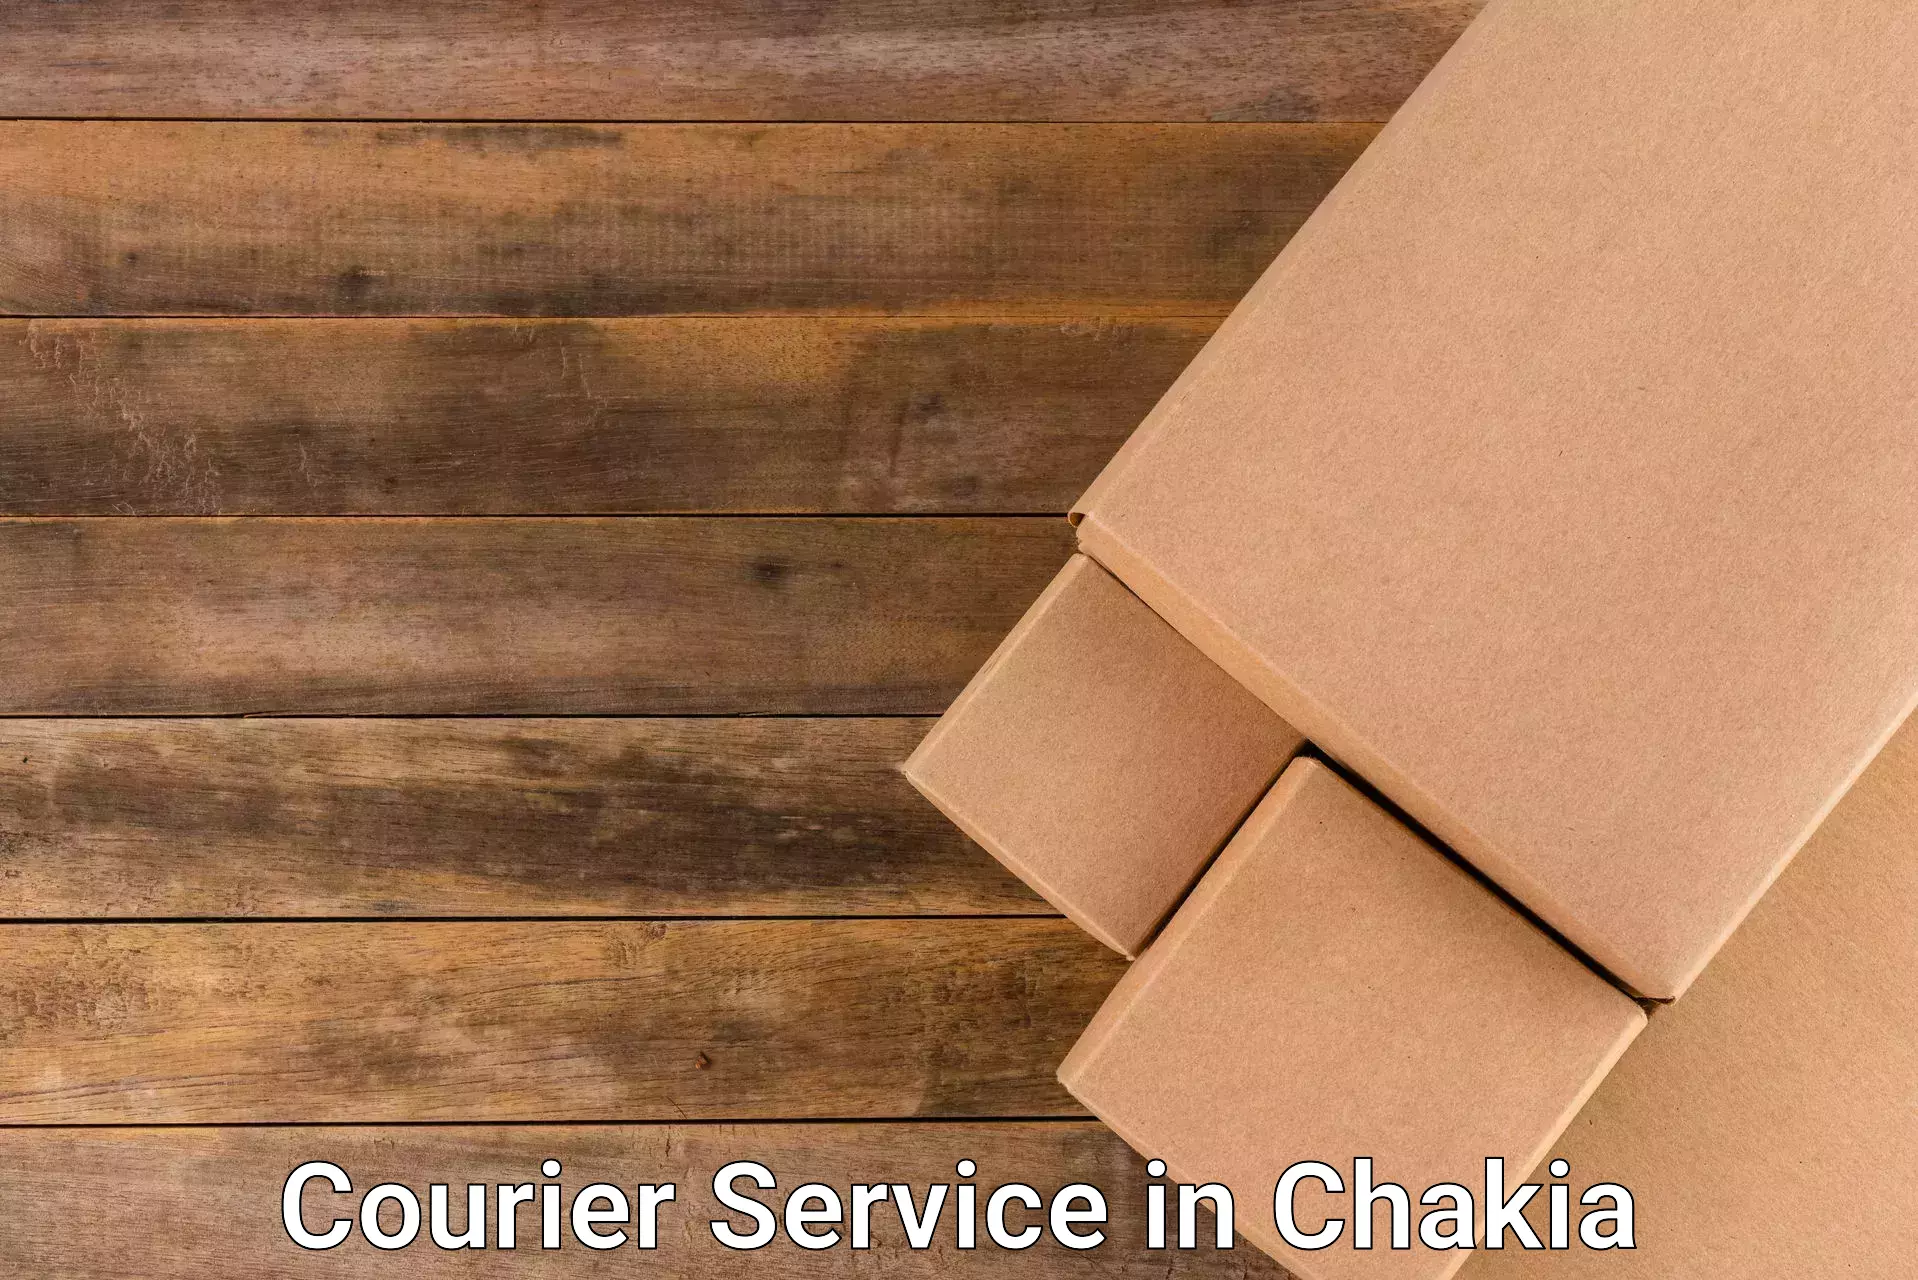 Courier dispatch services in Chakia